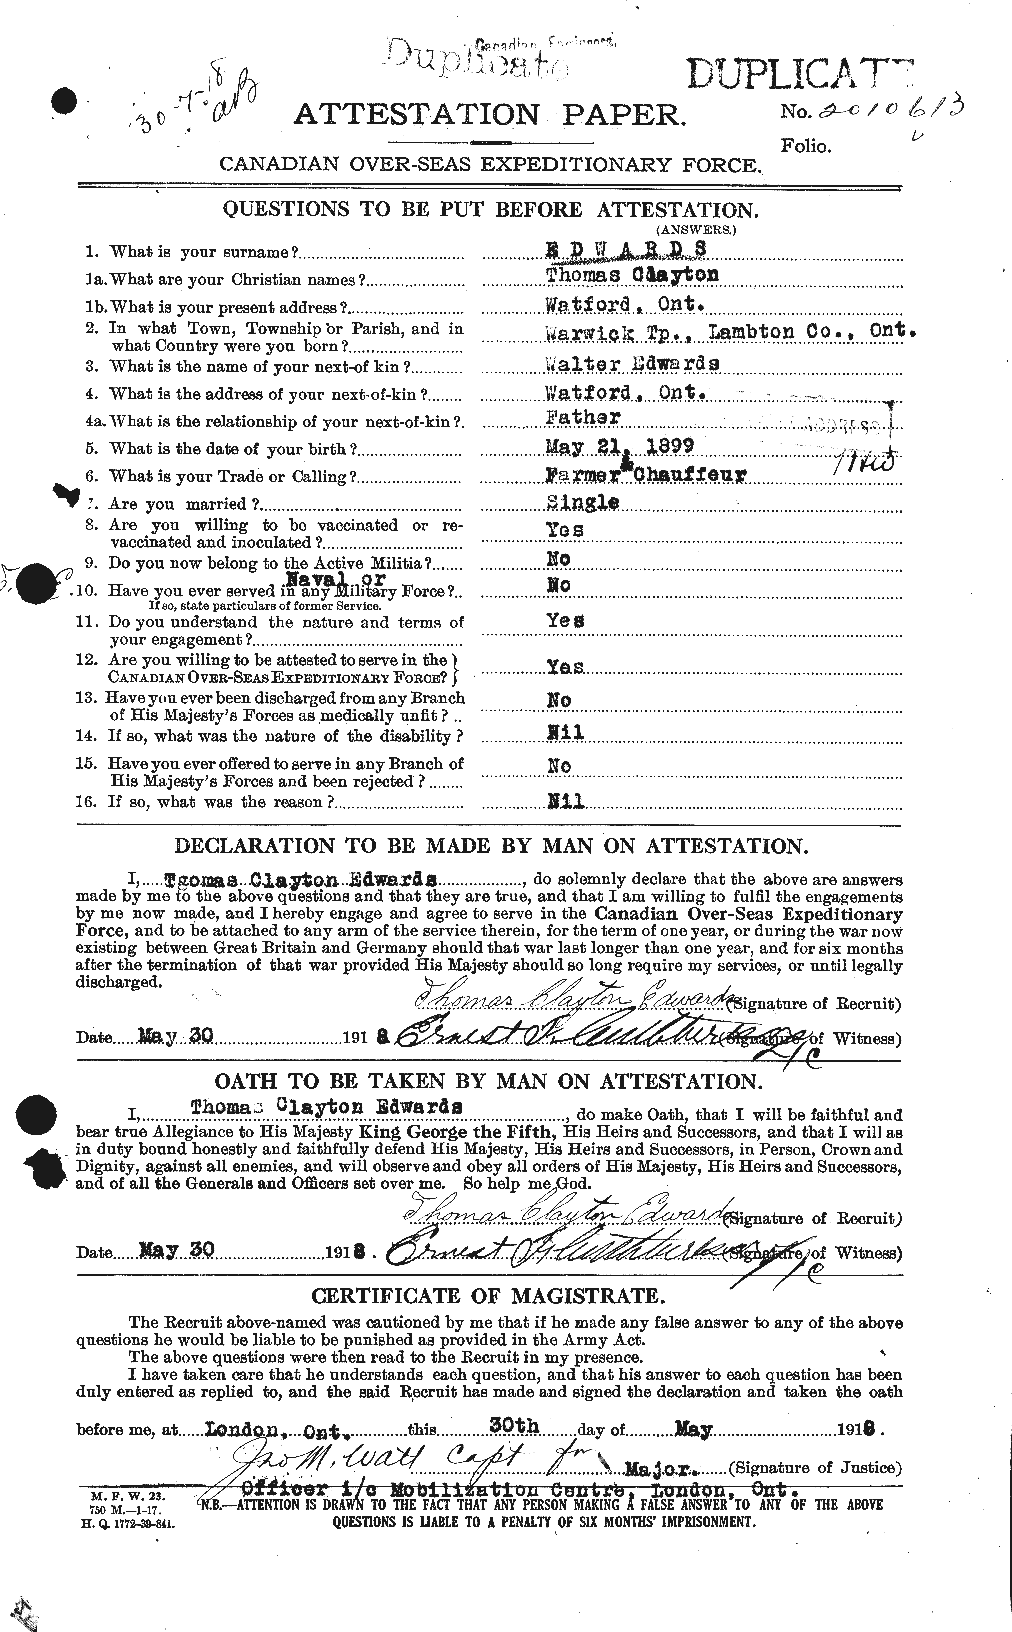 Personnel Records of the First World War - CEF 310341a